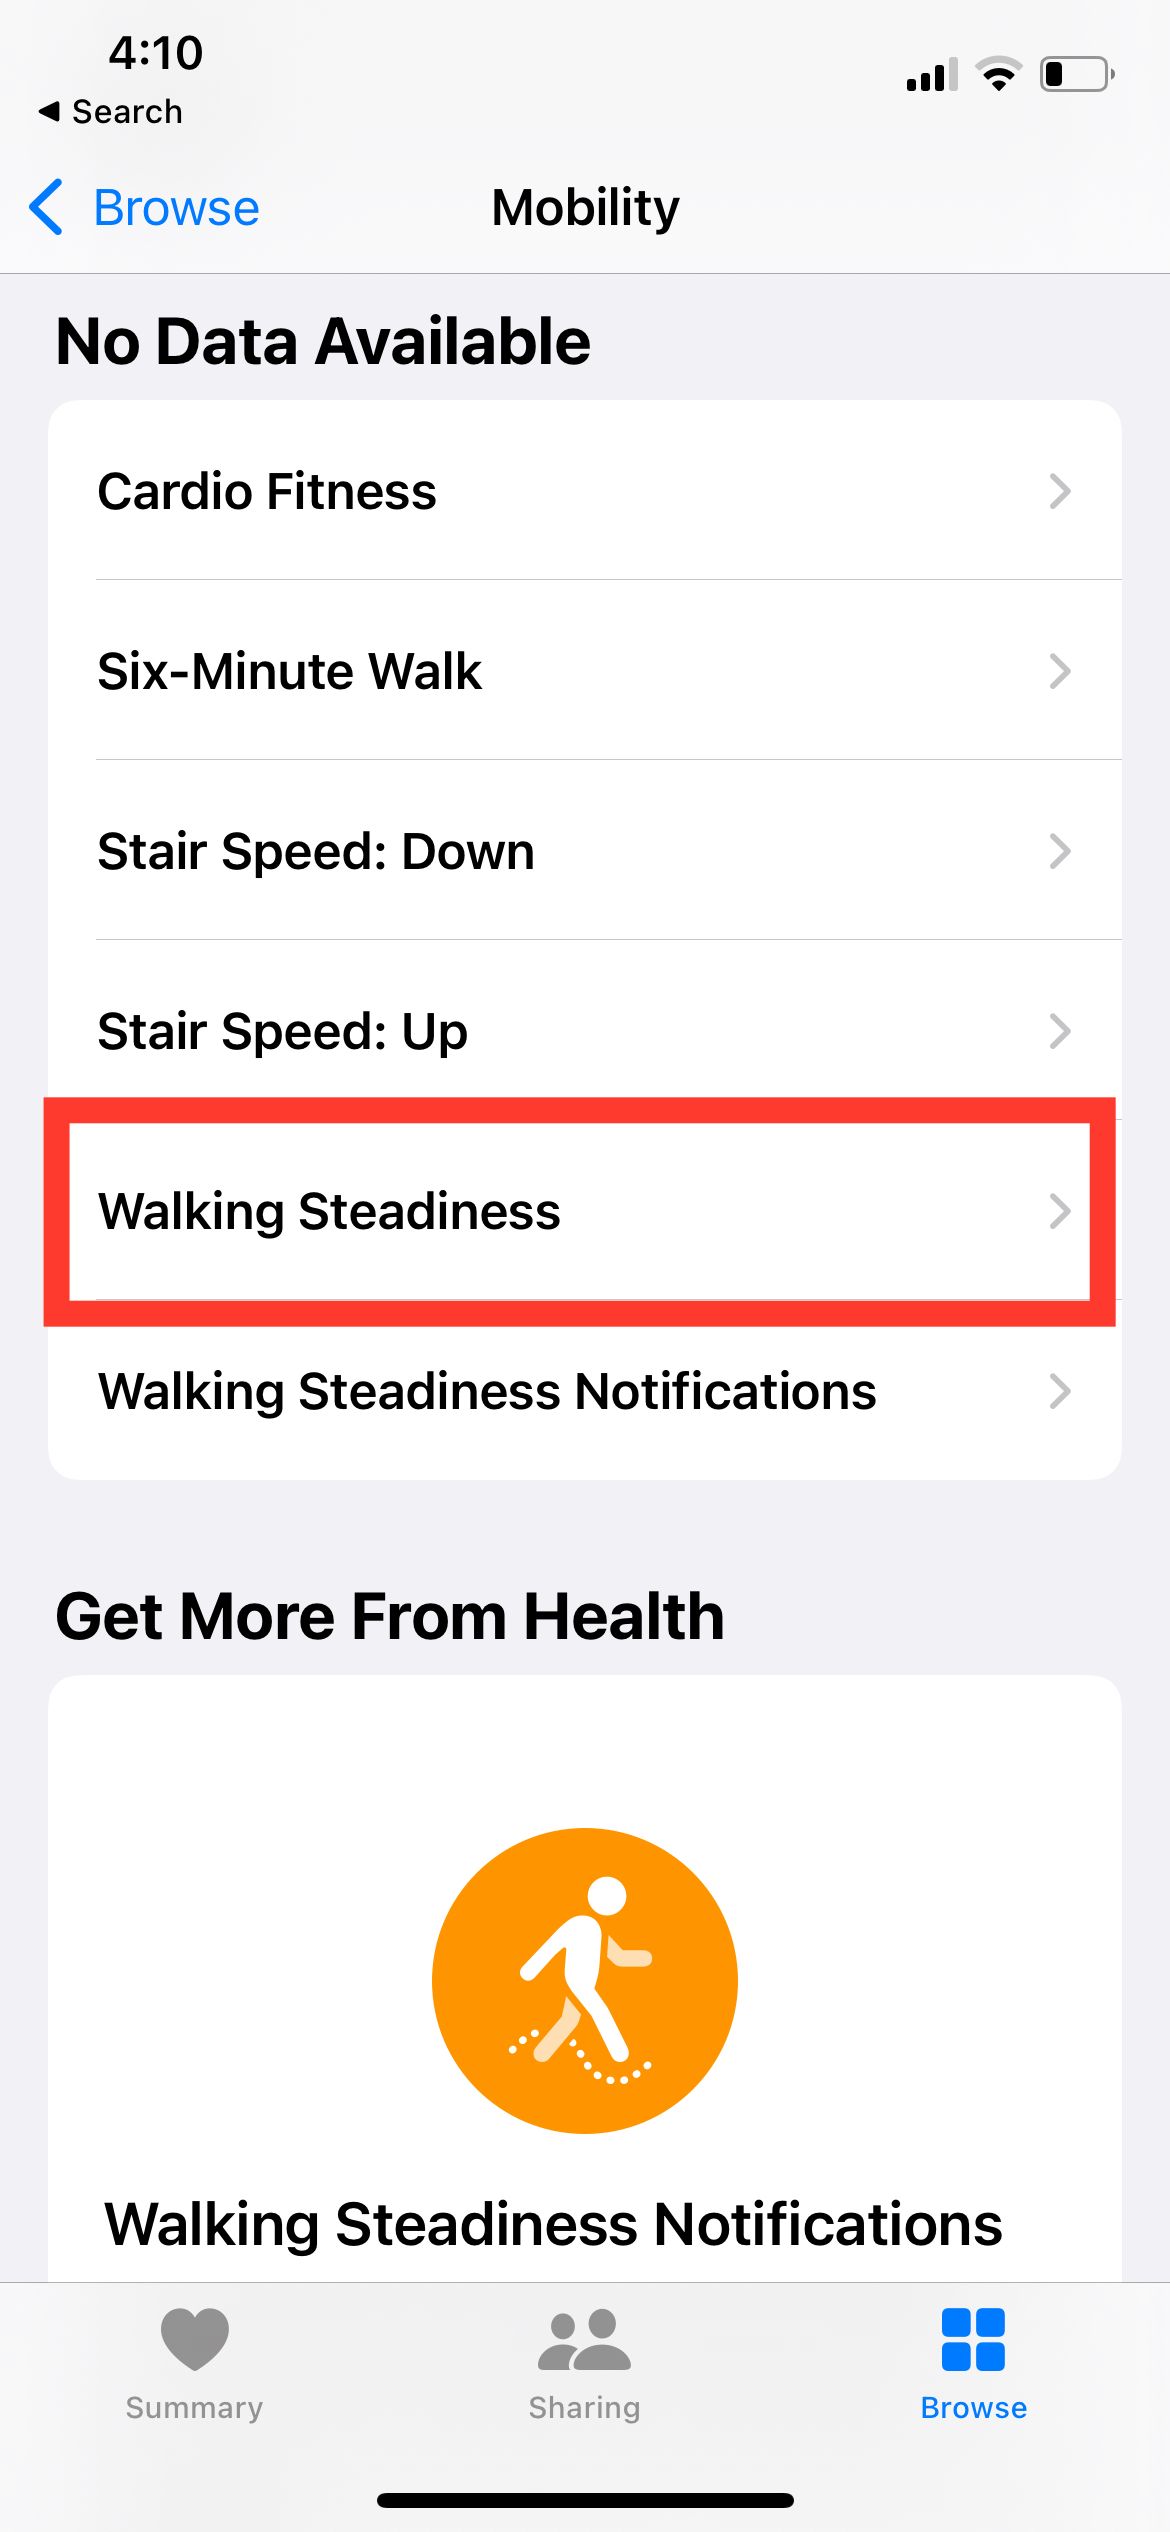 Walking Steadiness Under Mobility on Health App